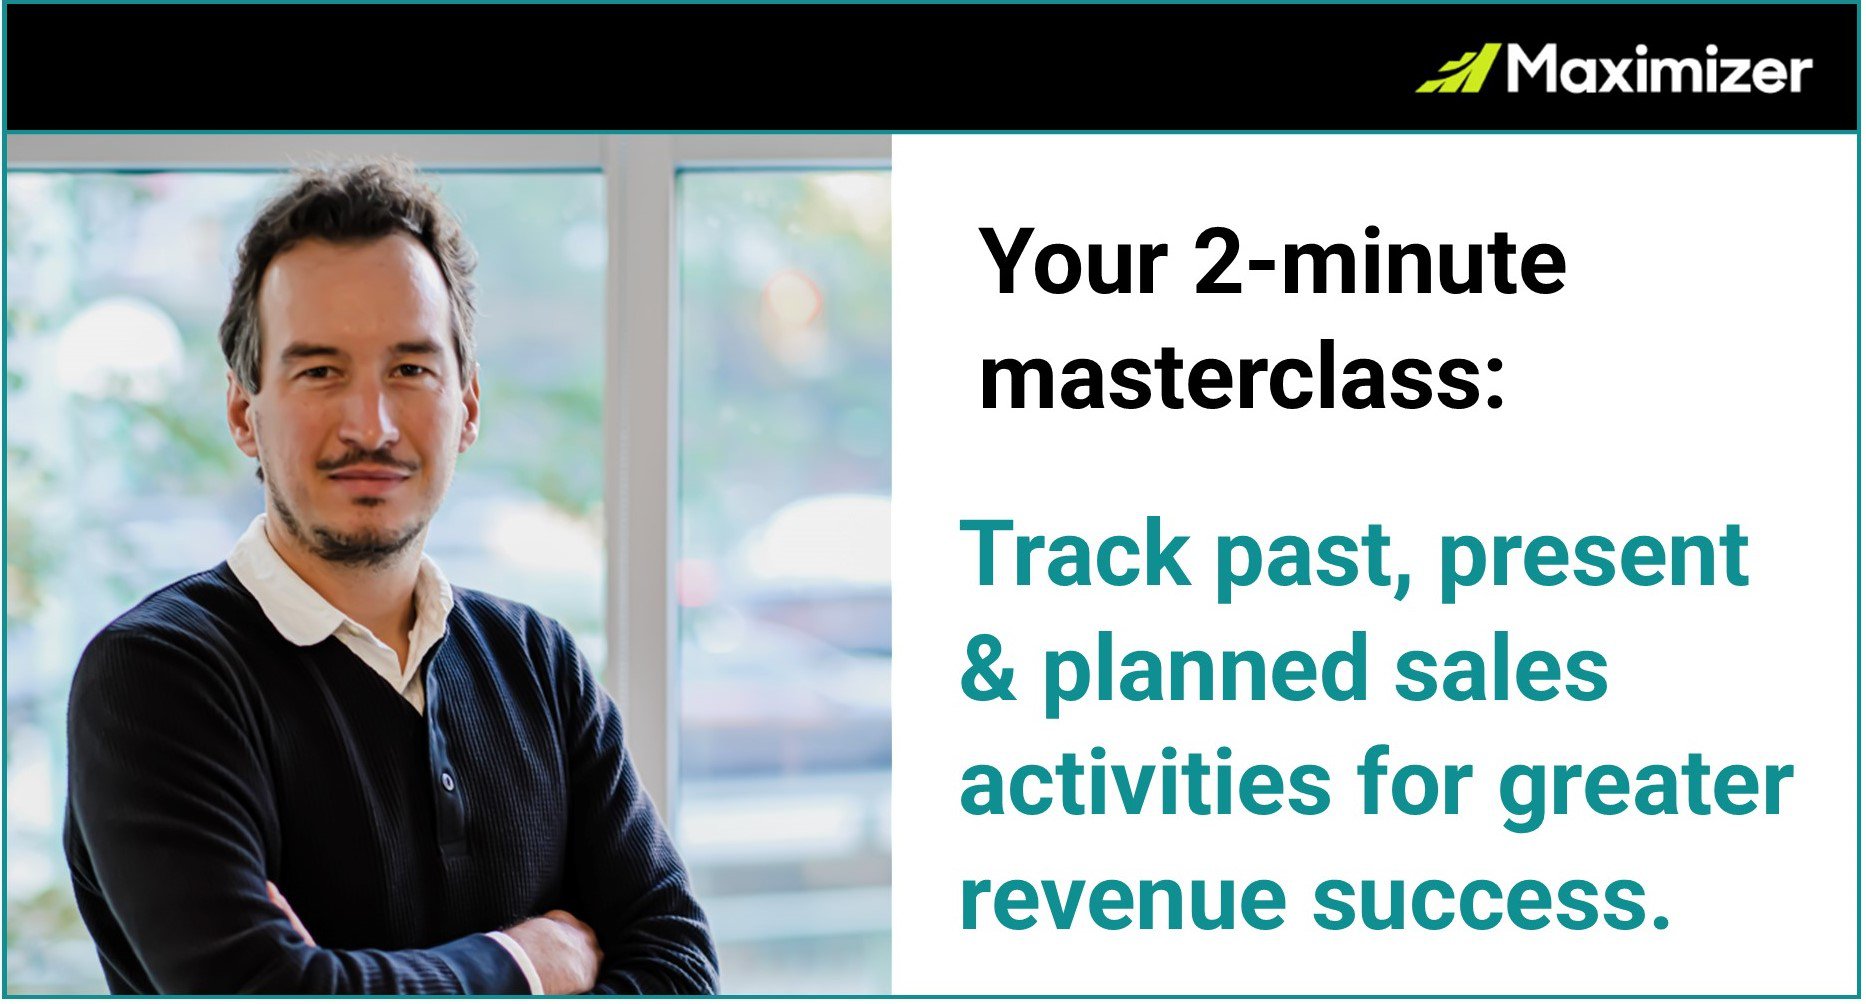 Two-minute masterclass: How to increase revenue by tracking past, present & planned sales activities cover